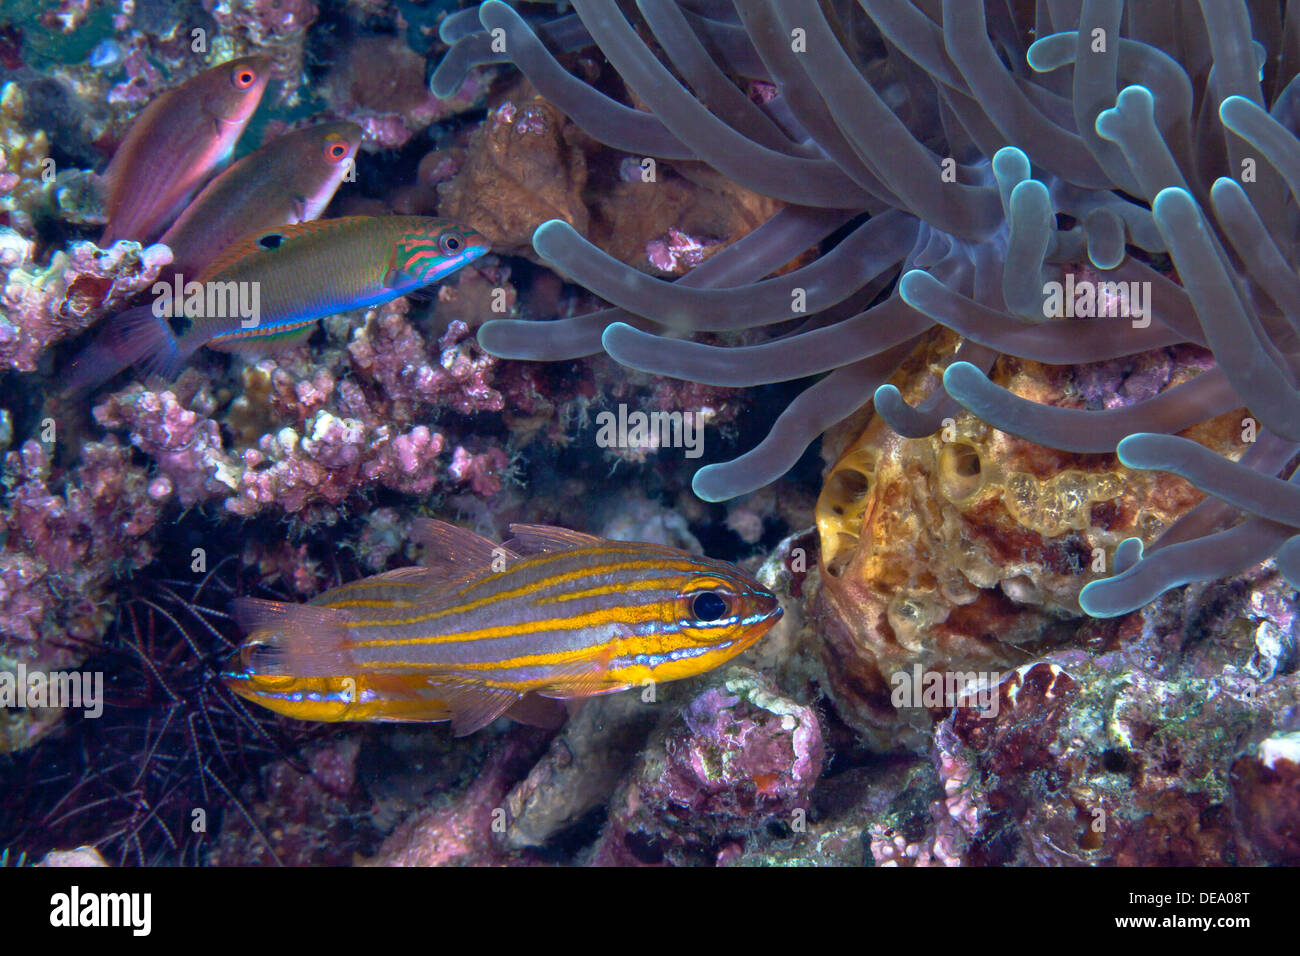 Yellow striped cardinal fish in coral reef. Stock Photo